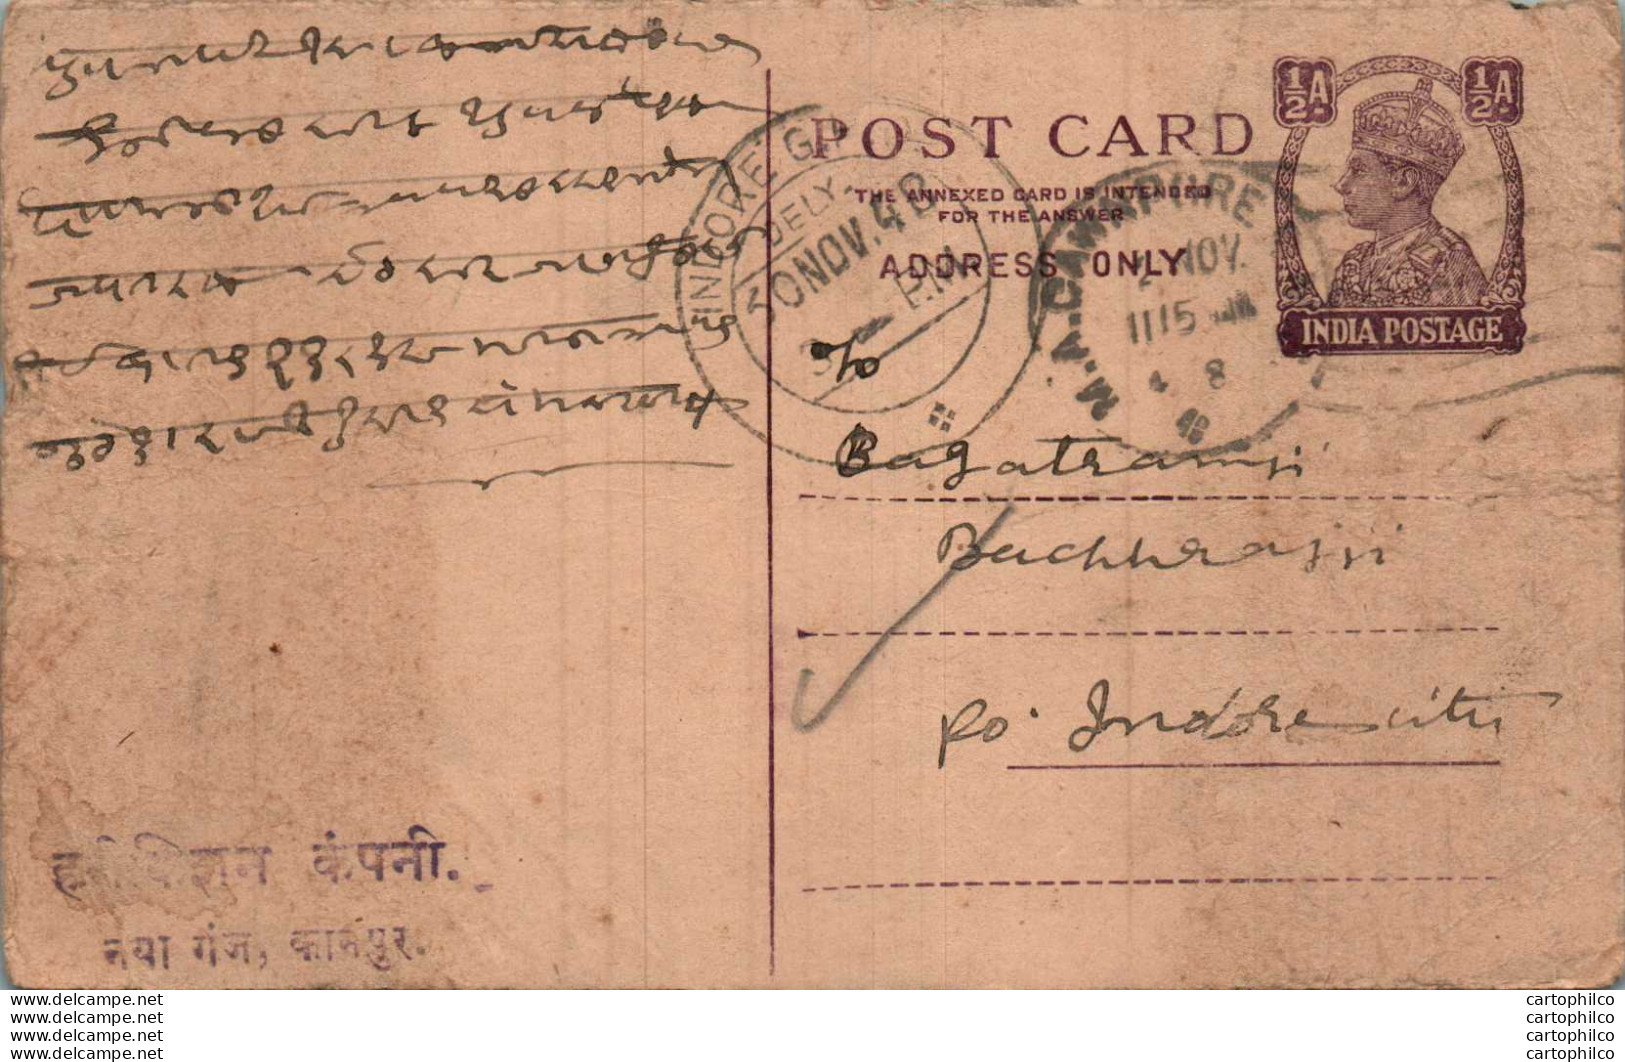 India Postal Stationery George VI 1/2 A Indore City Cds - Postcards